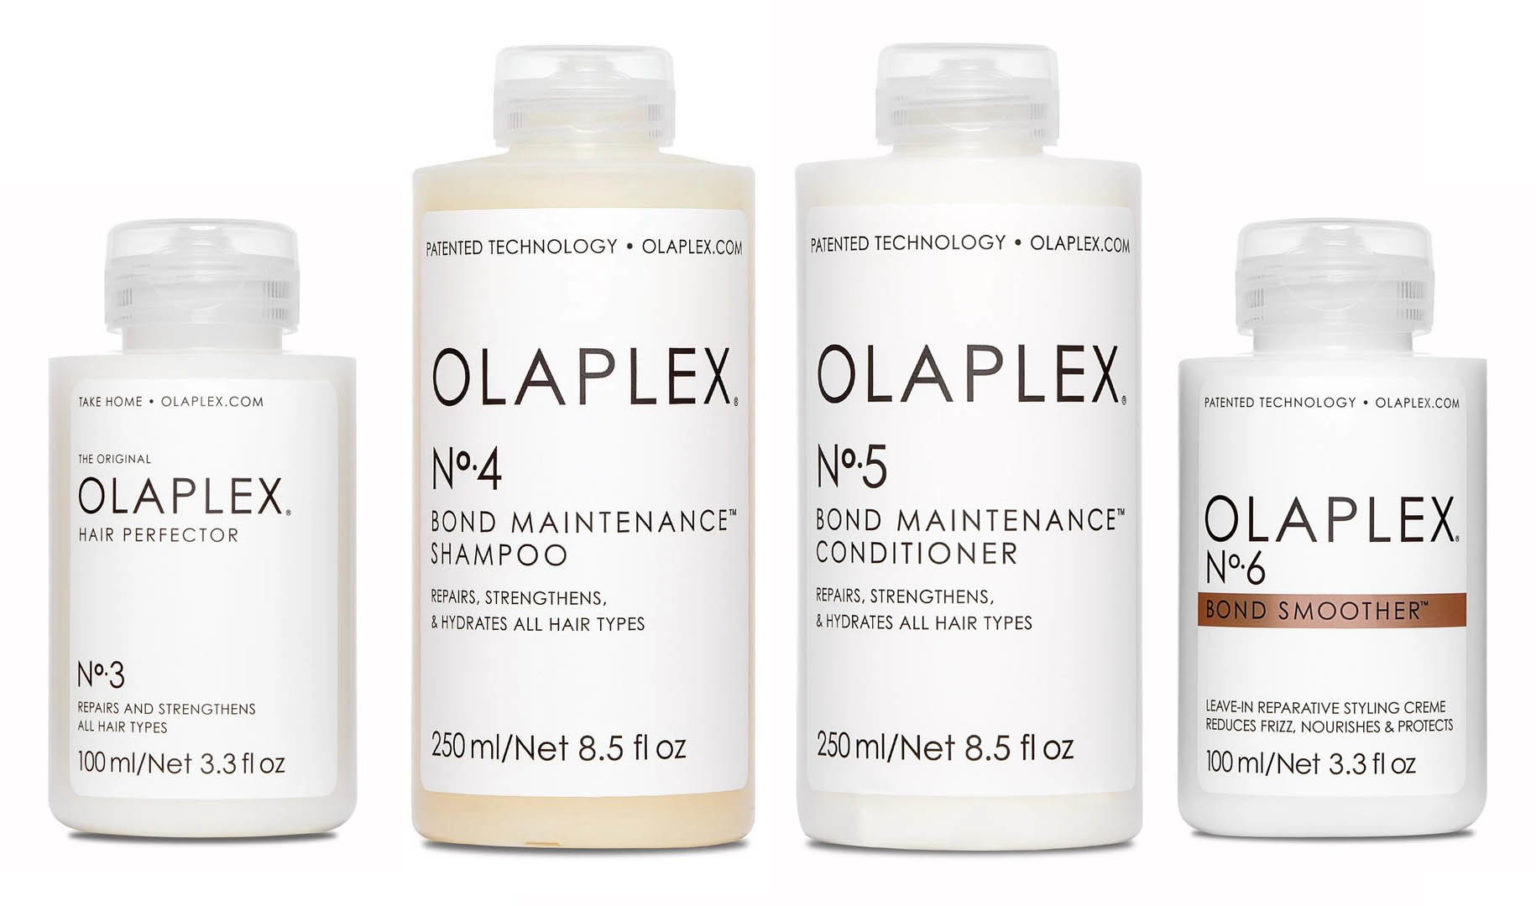 Pocketful of Joules - Reviewing Olaplex Hair Products